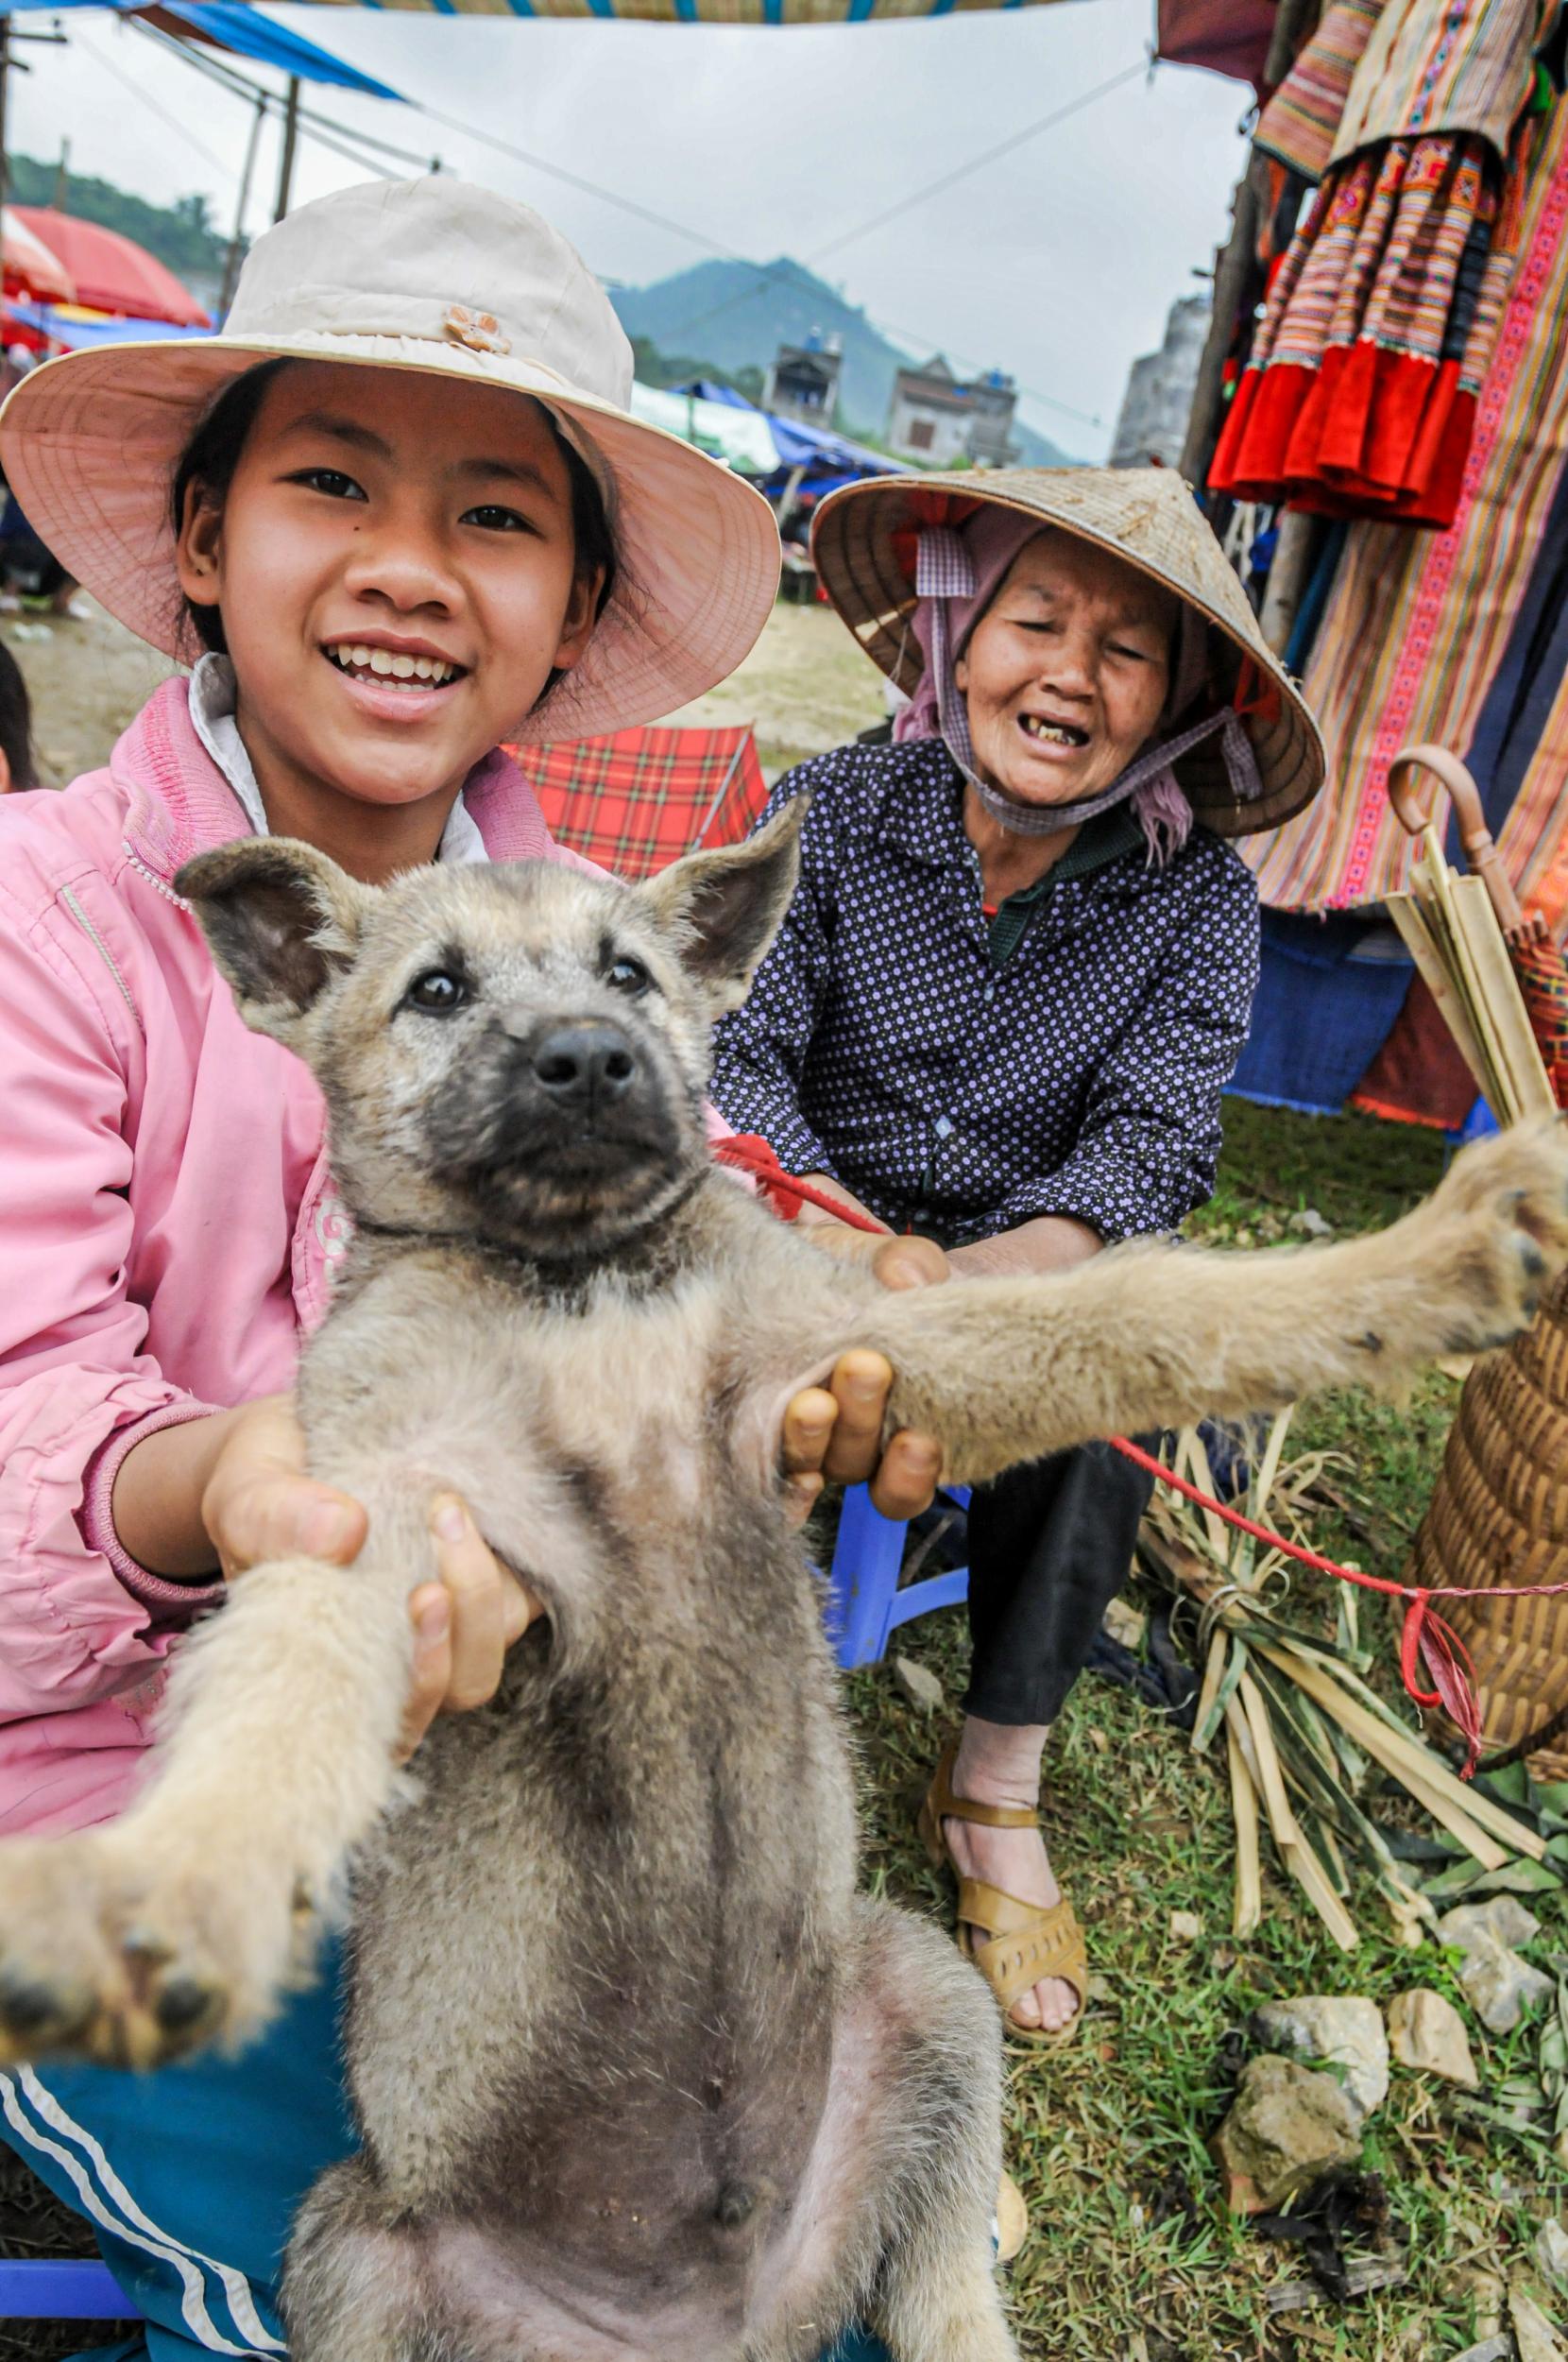 A dog sold for consumption in Vietnam (Jo-Anne McArthur/We Animals)